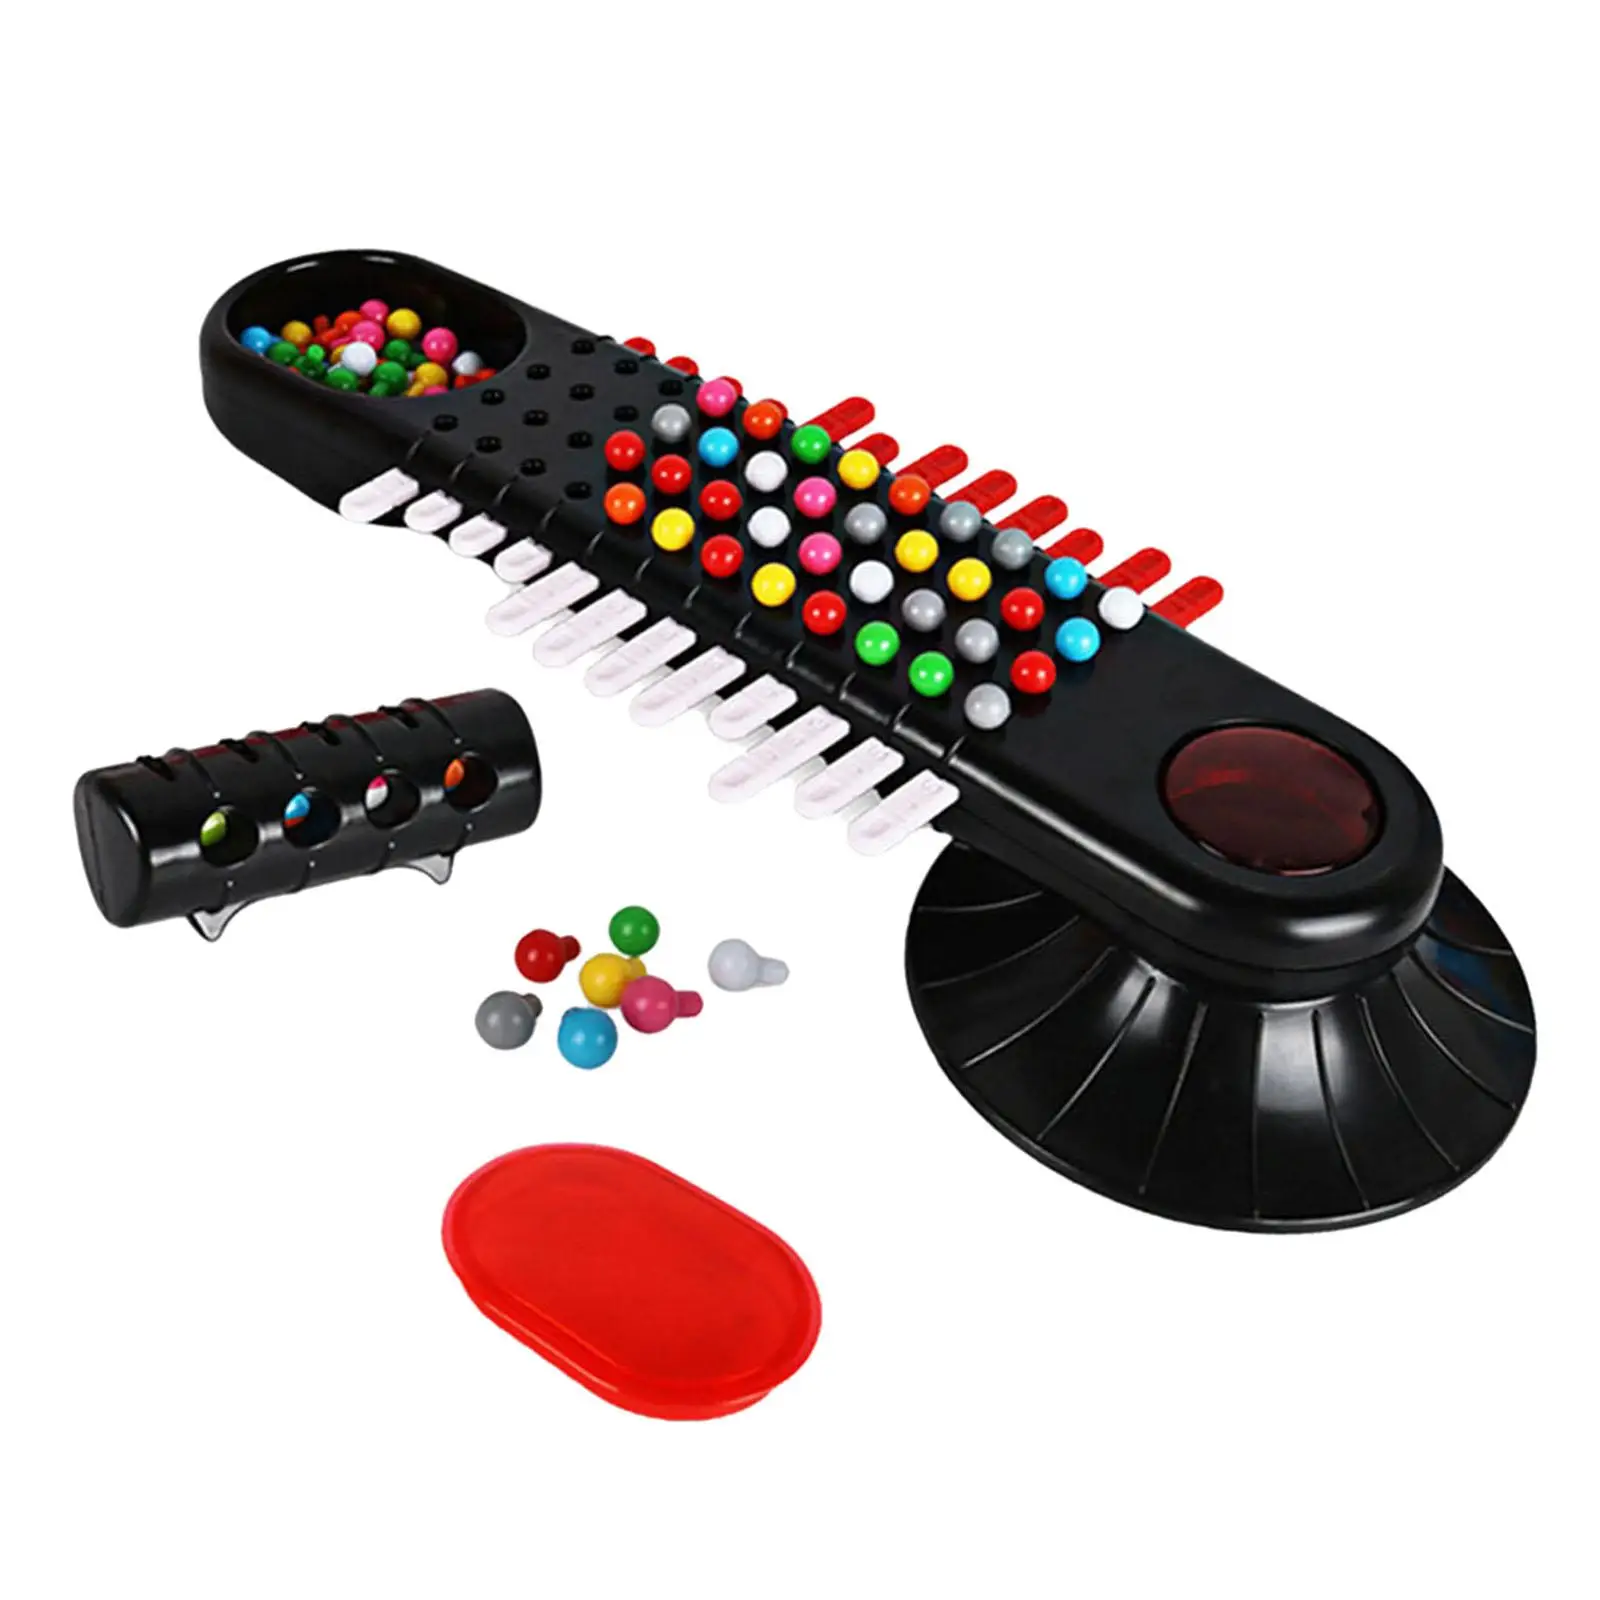 Code Cracking Bead Game Codebreaker Game Logic Thicking Educational Password Toy for Kids Children Traveling Family Fun Dorm